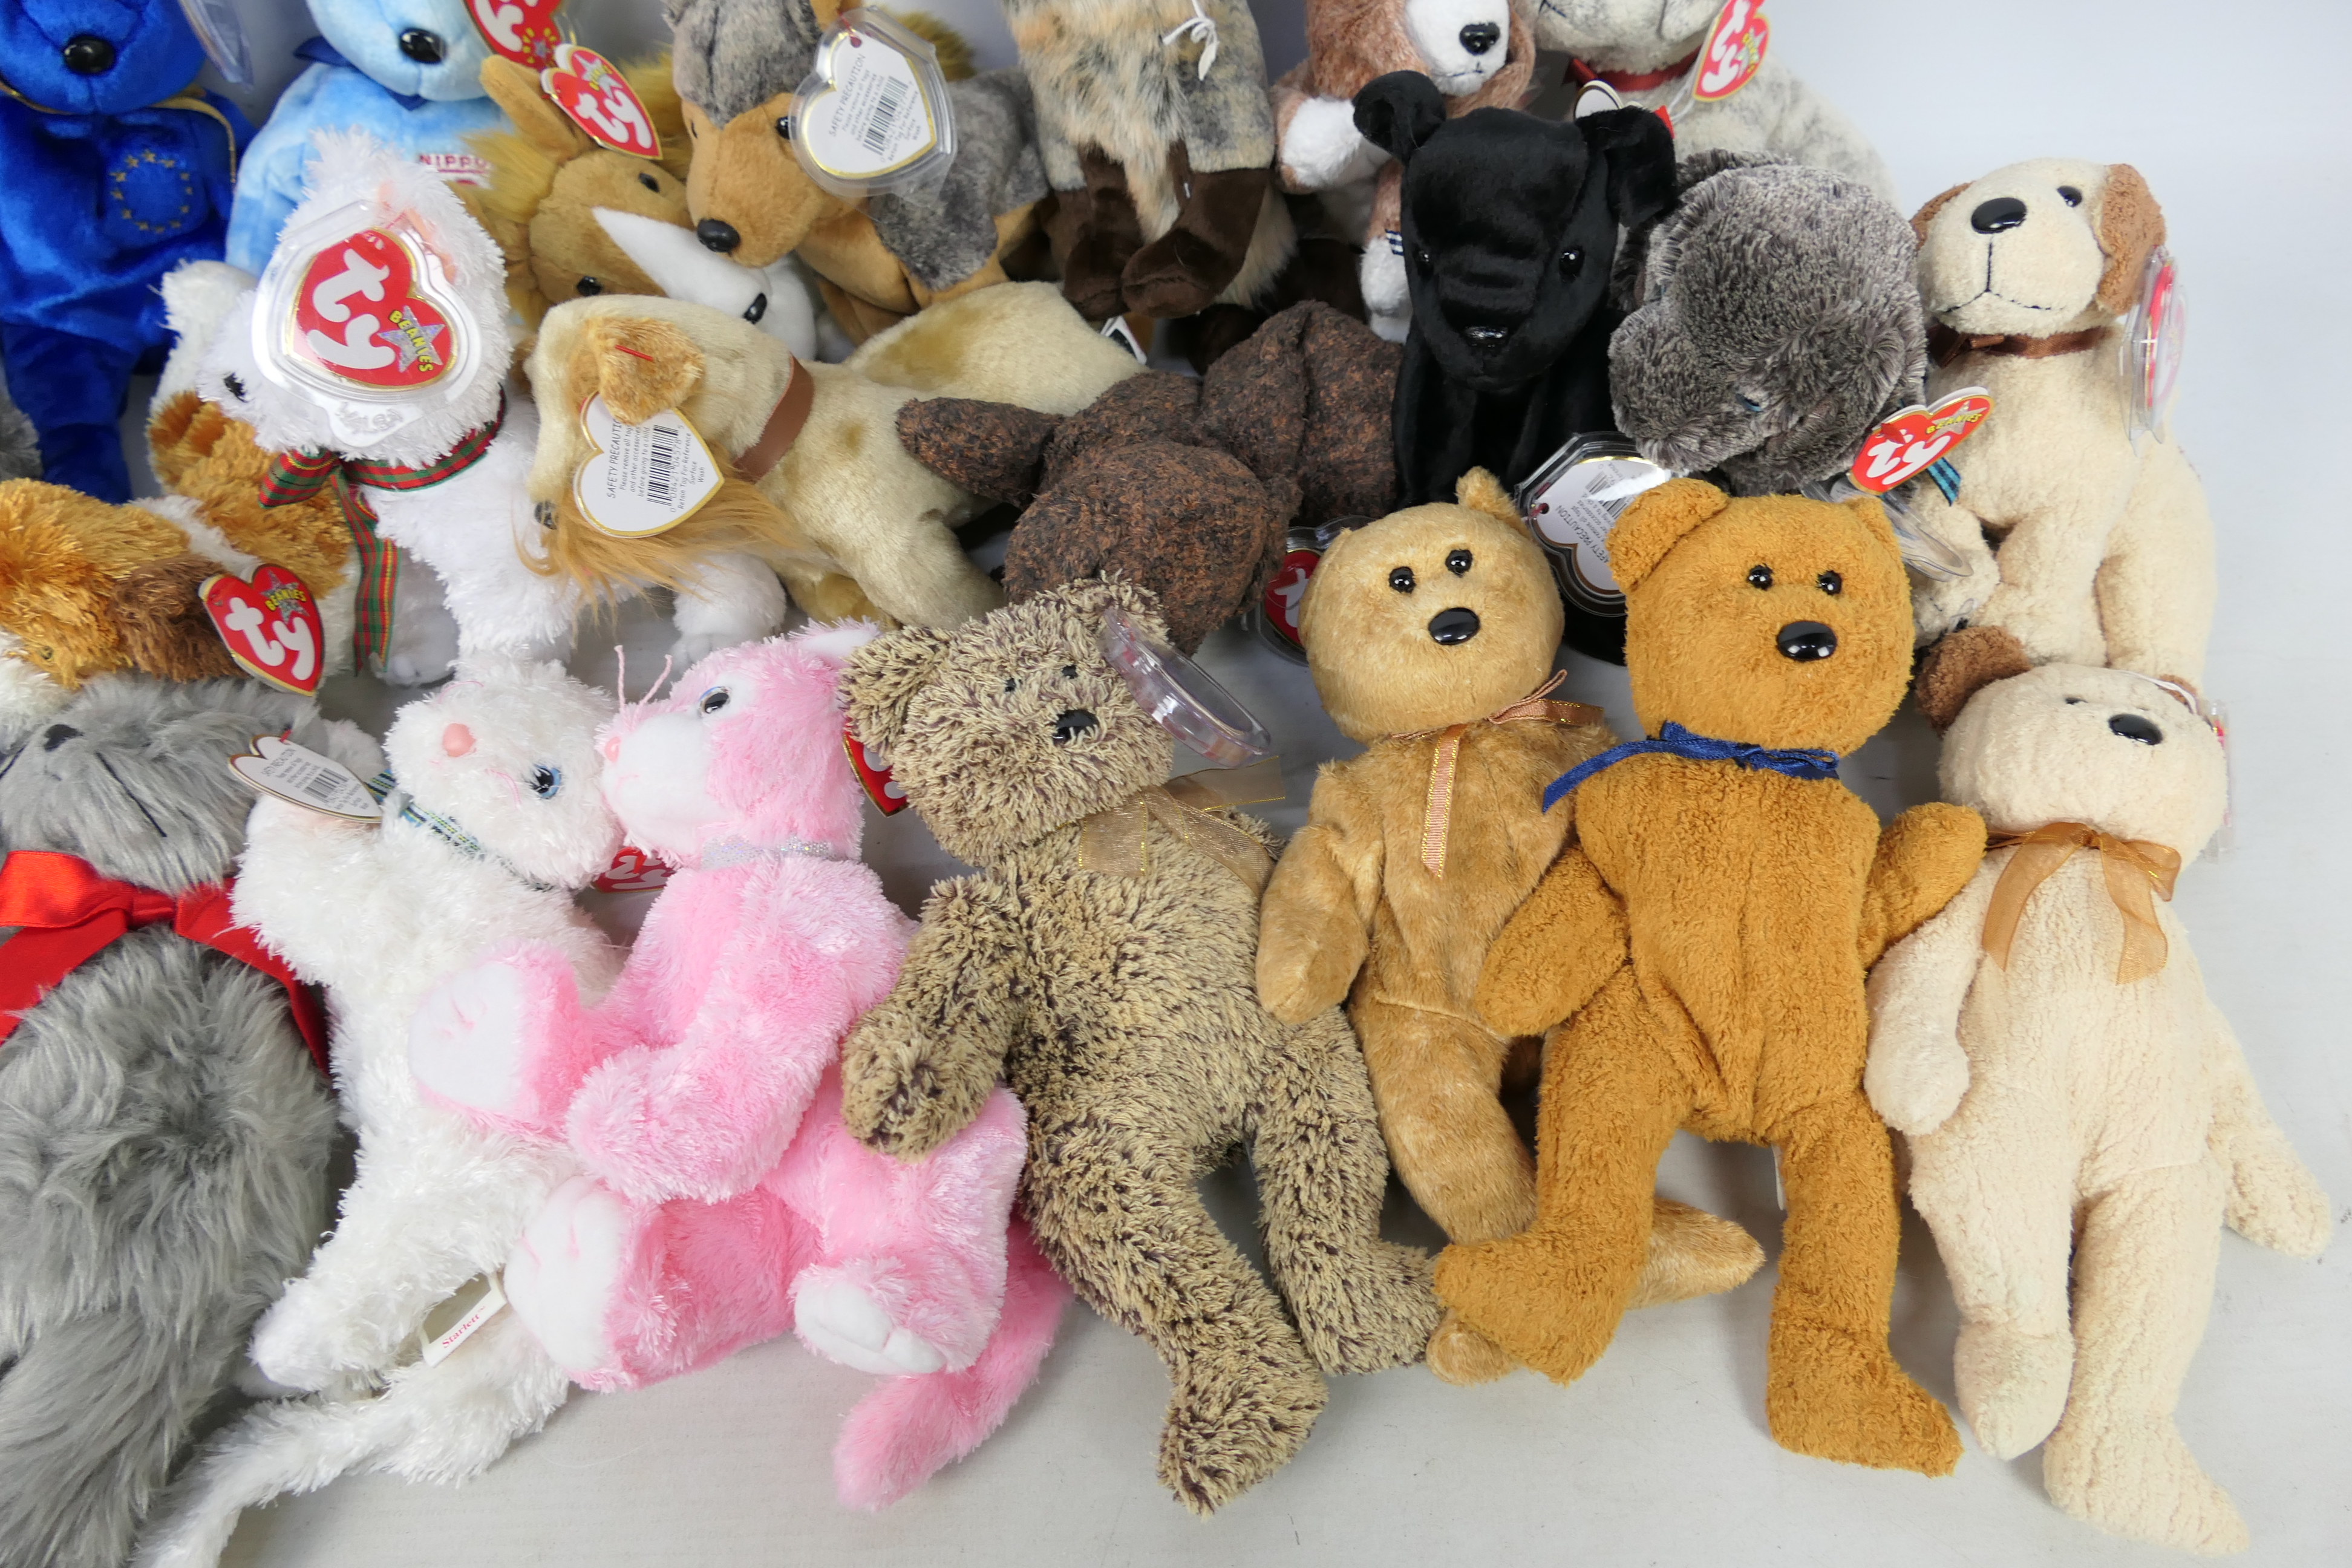 Ty - 32 x Ty Beanie Baby bears and soft toys - Lot includes 5 x dog-themed Beanie Baby soft toys to - Image 4 of 5